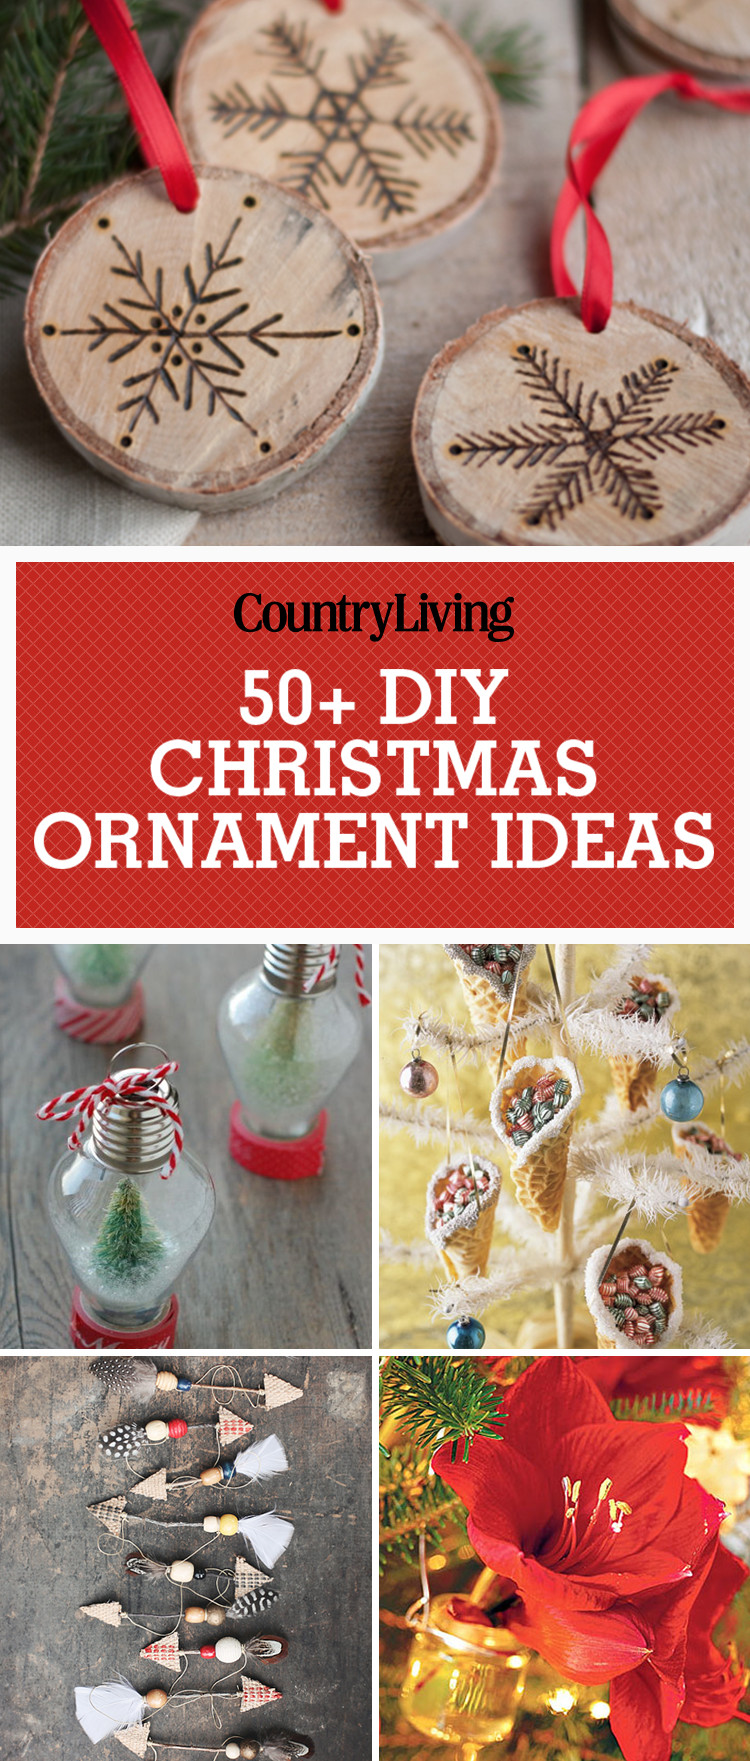 DIY Easy Christmas Ornaments
 55 Homemade Christmas Ornaments DIY Crafts with